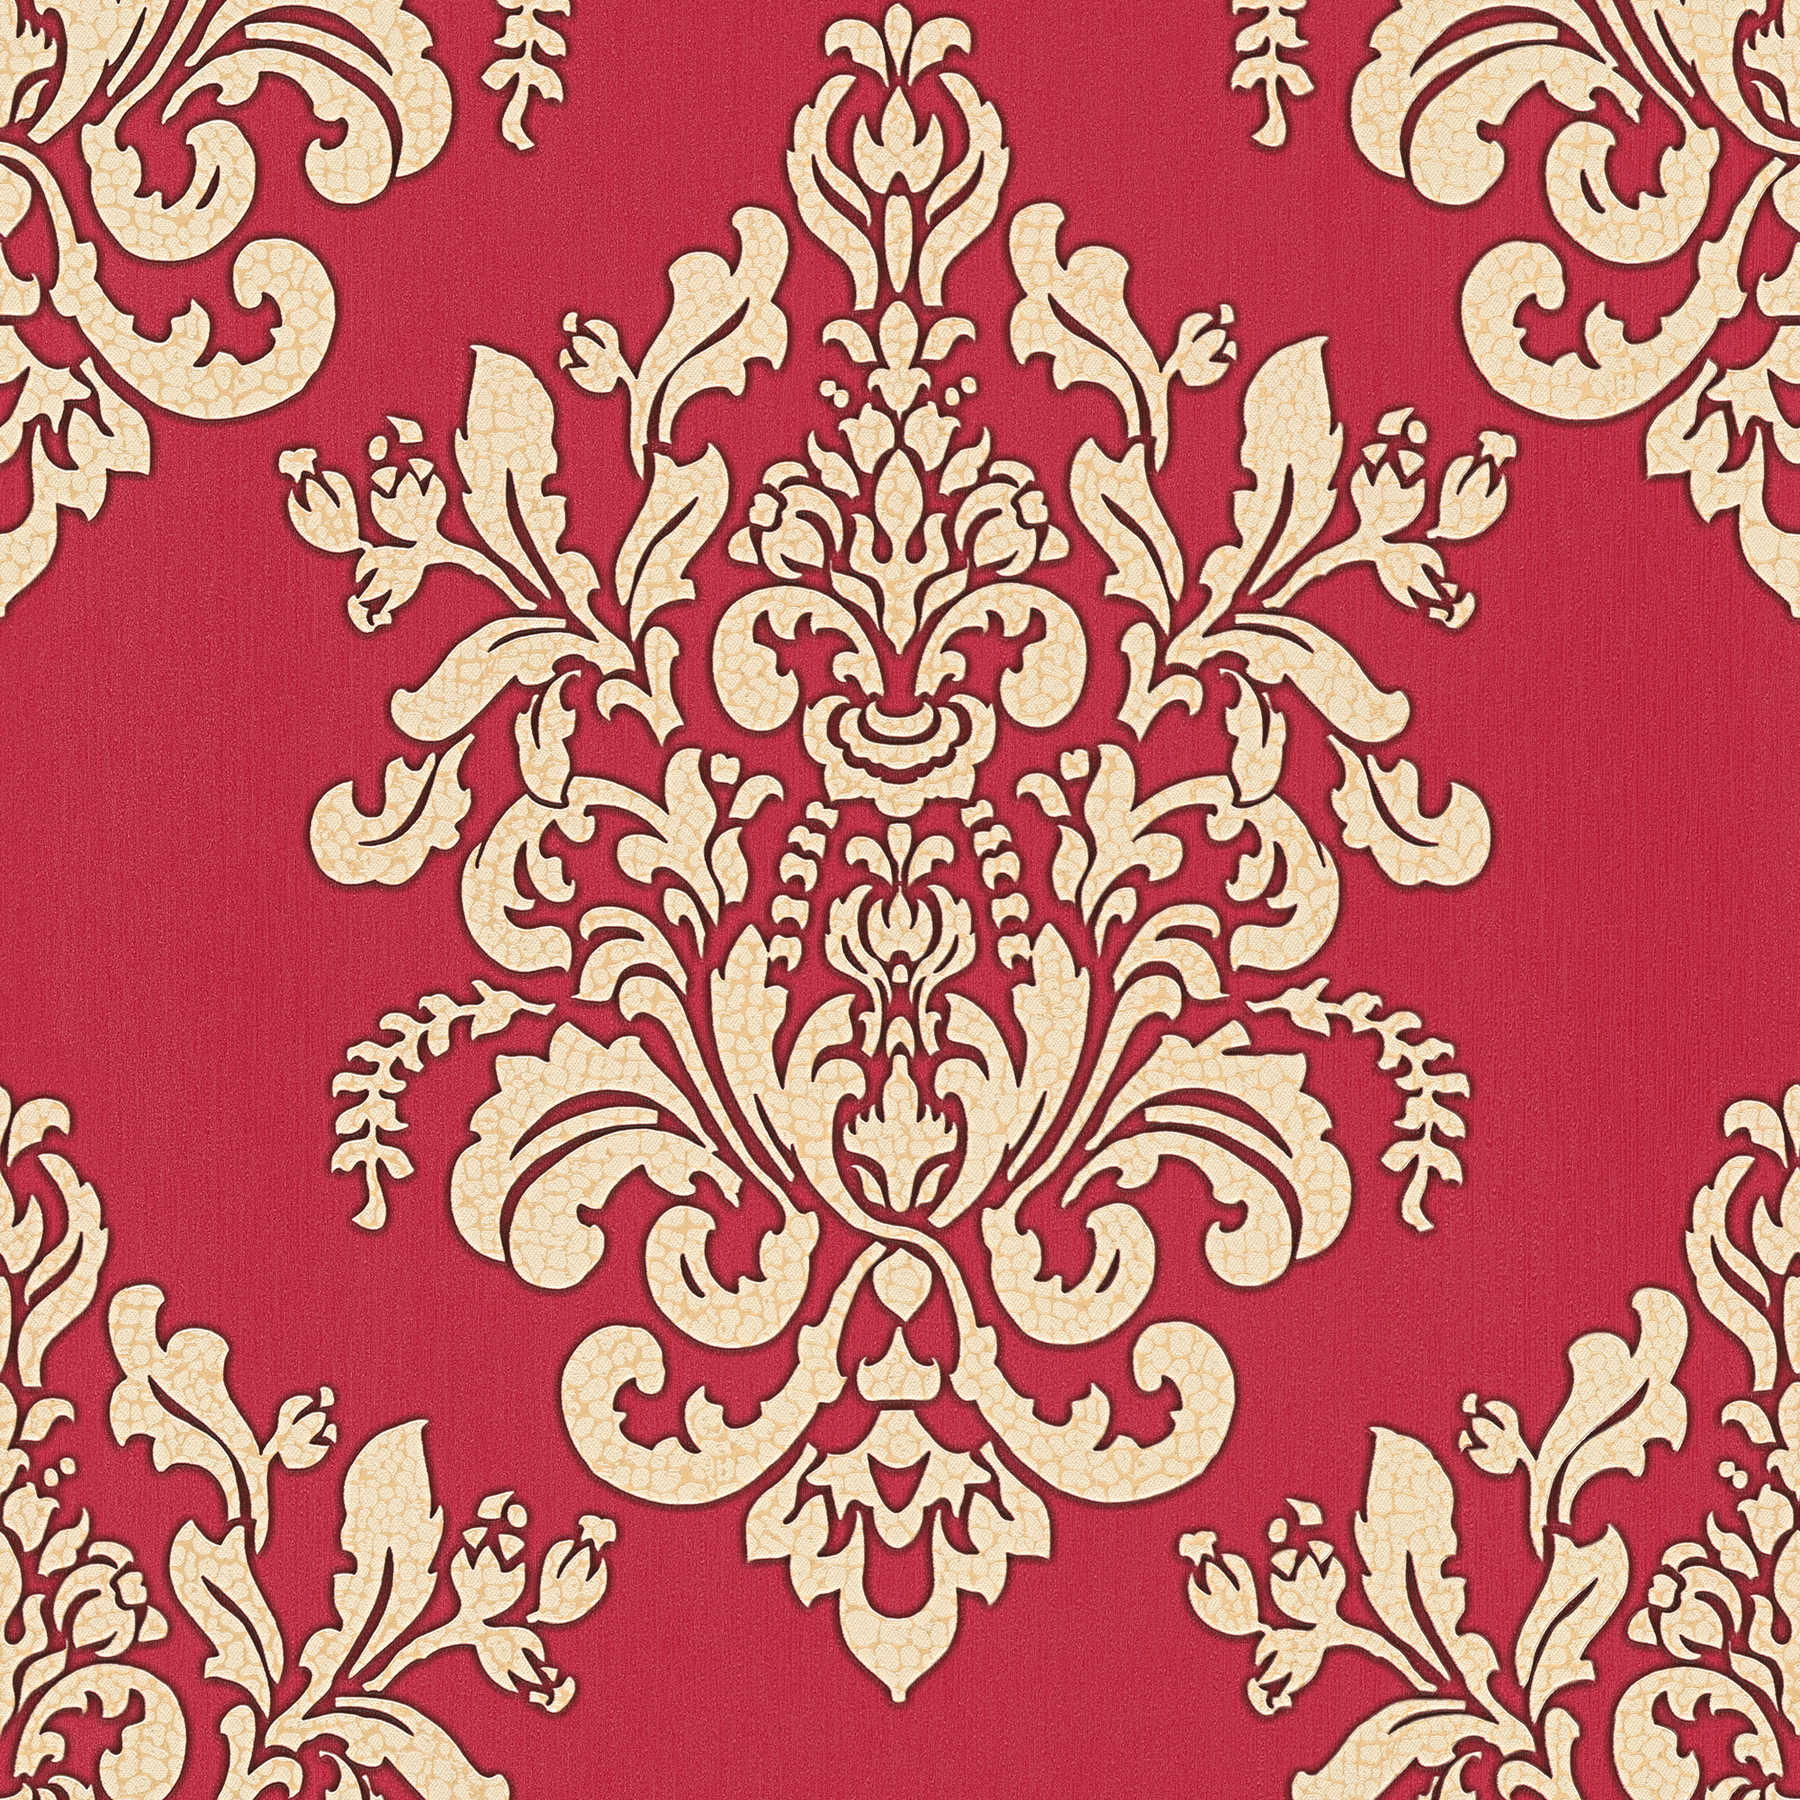 Ornament wallpaper with crackle effect - beige, red
